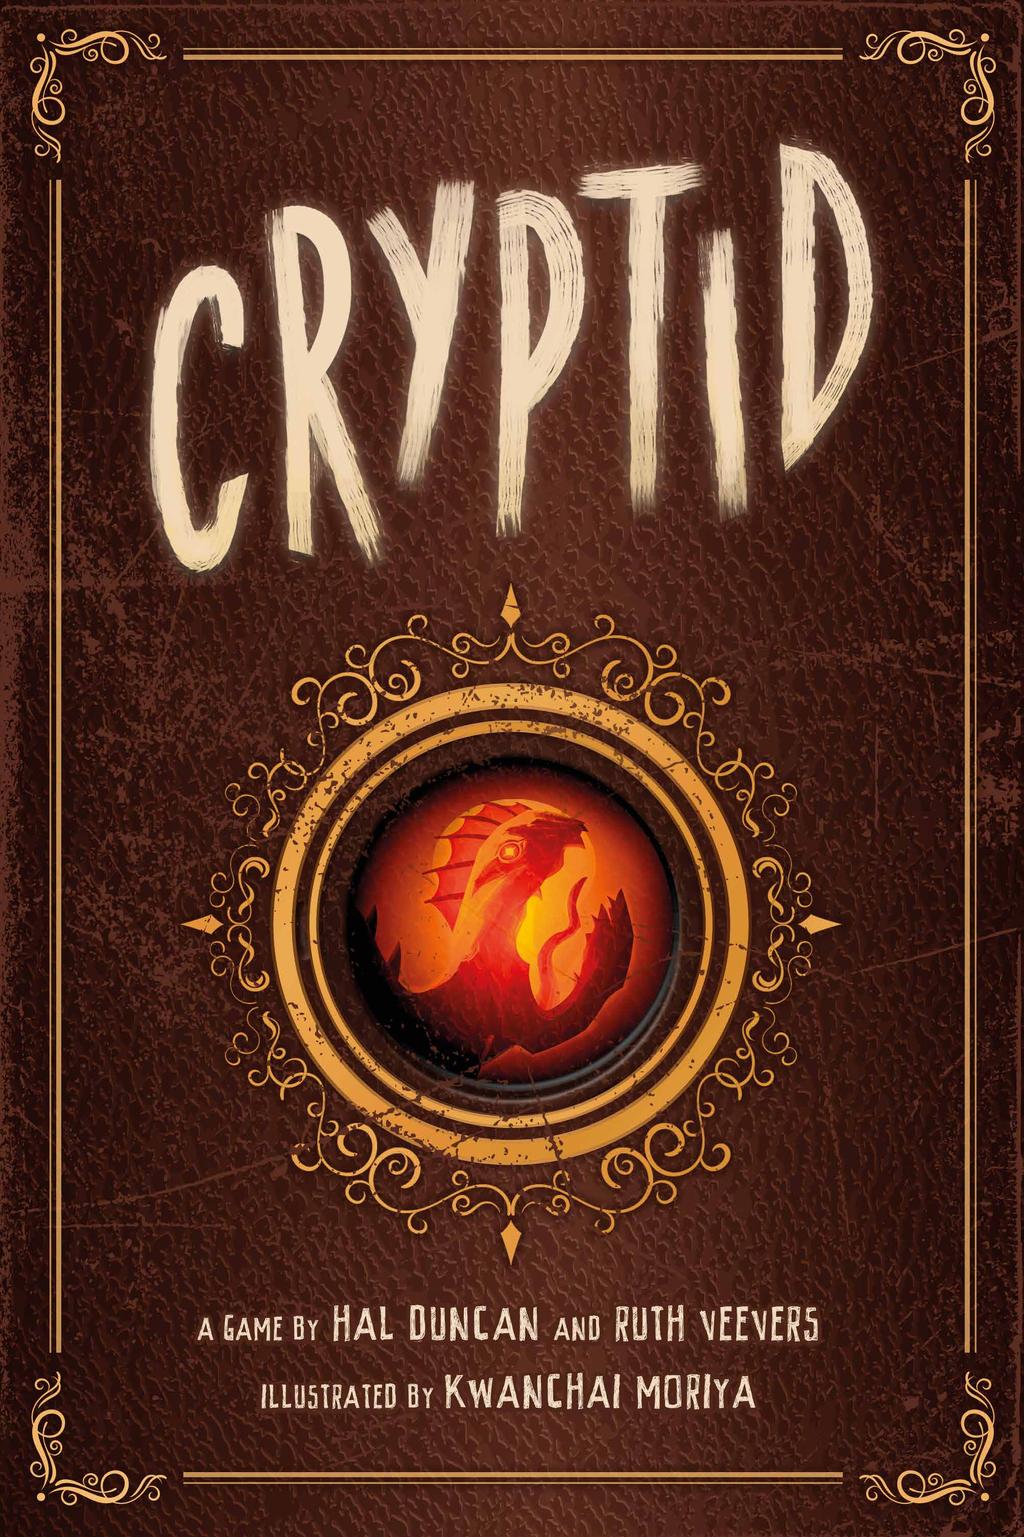 CRYPTID A GAME BY RUTH VEEVERS & HAL